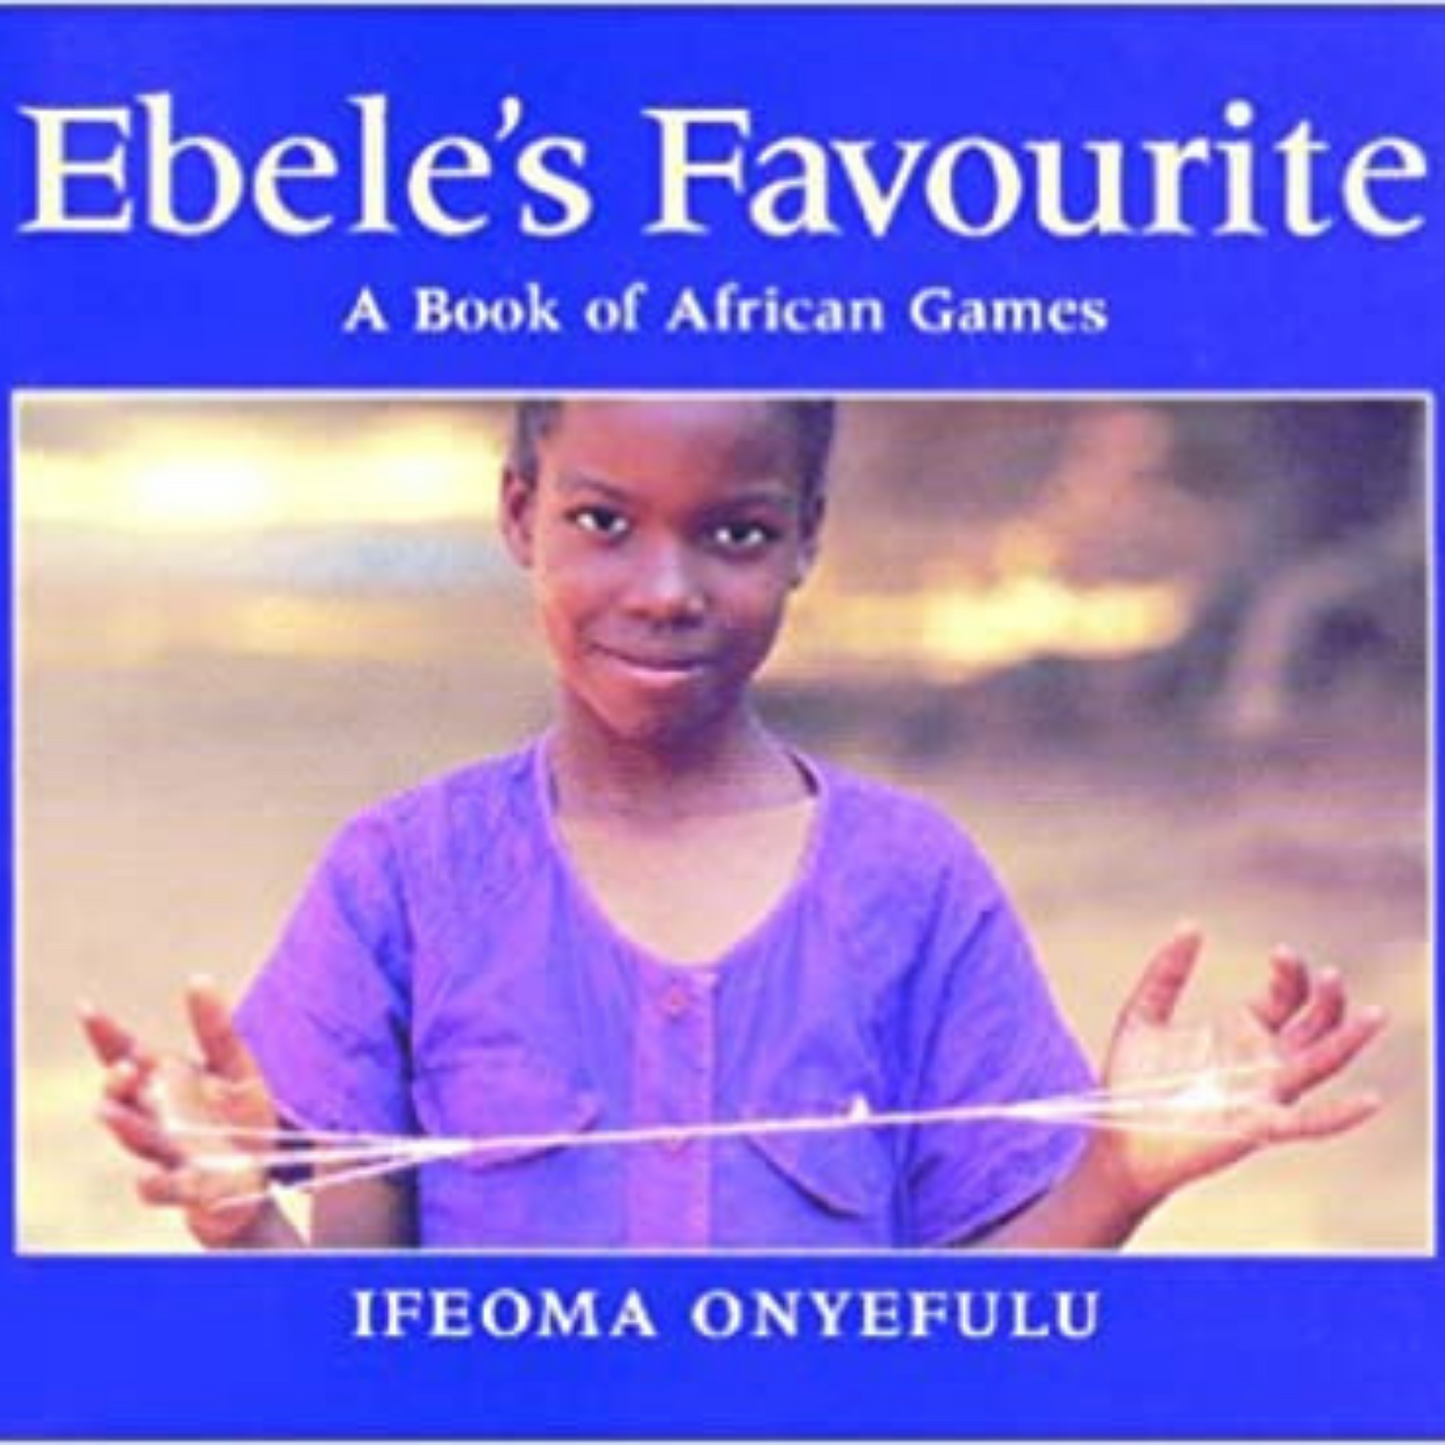 Ebele's Favourite: A Book of African Games